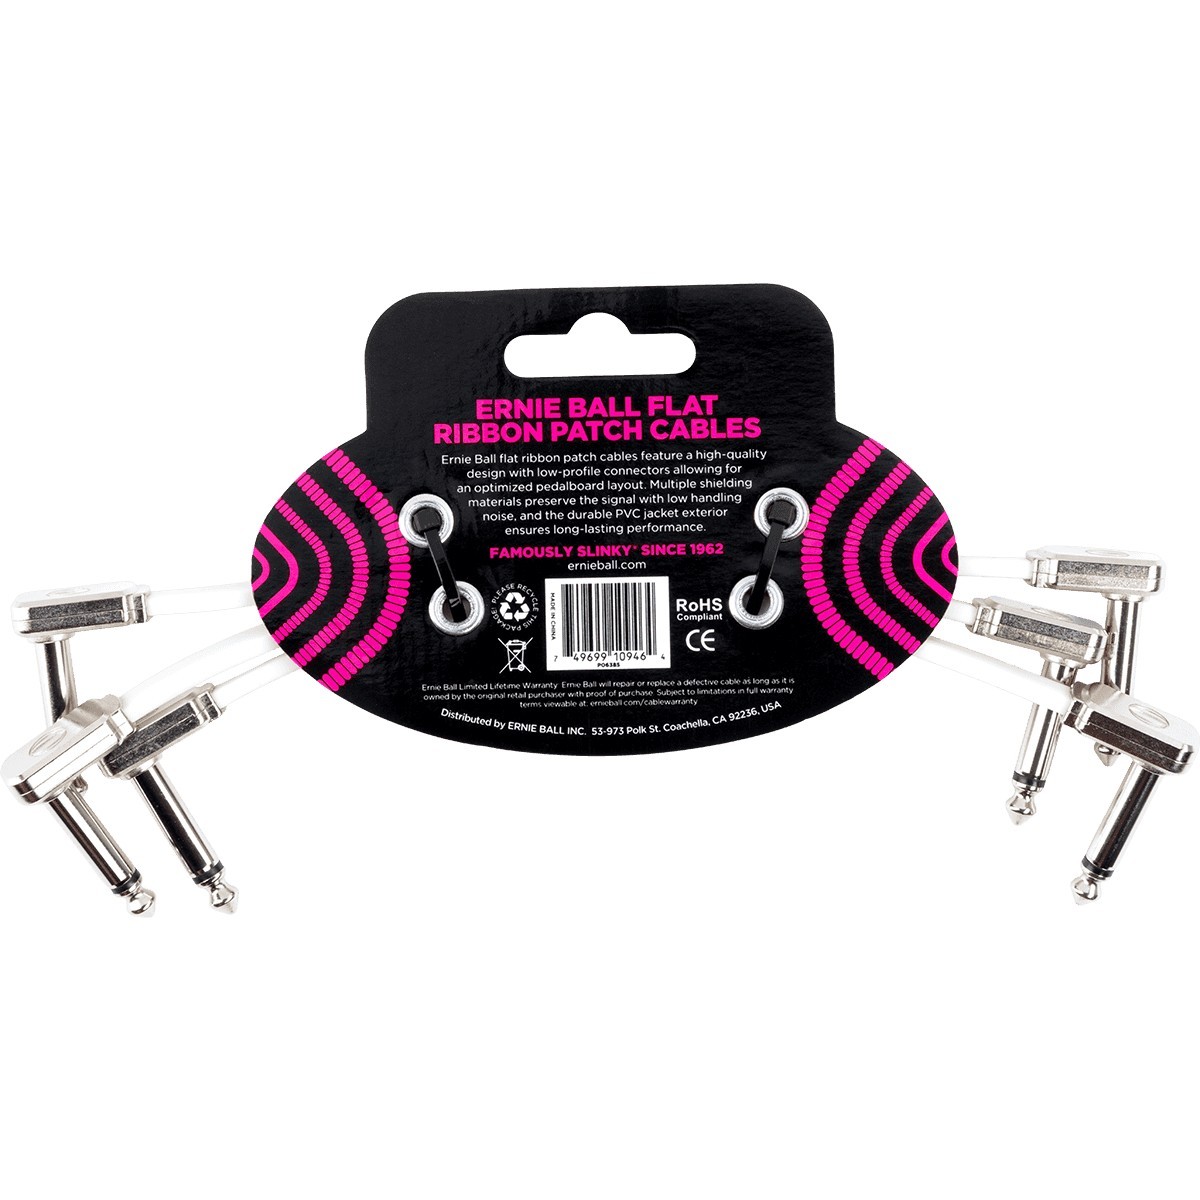 ERNIE BALL Cable Instrument Patch Flat Ribbon